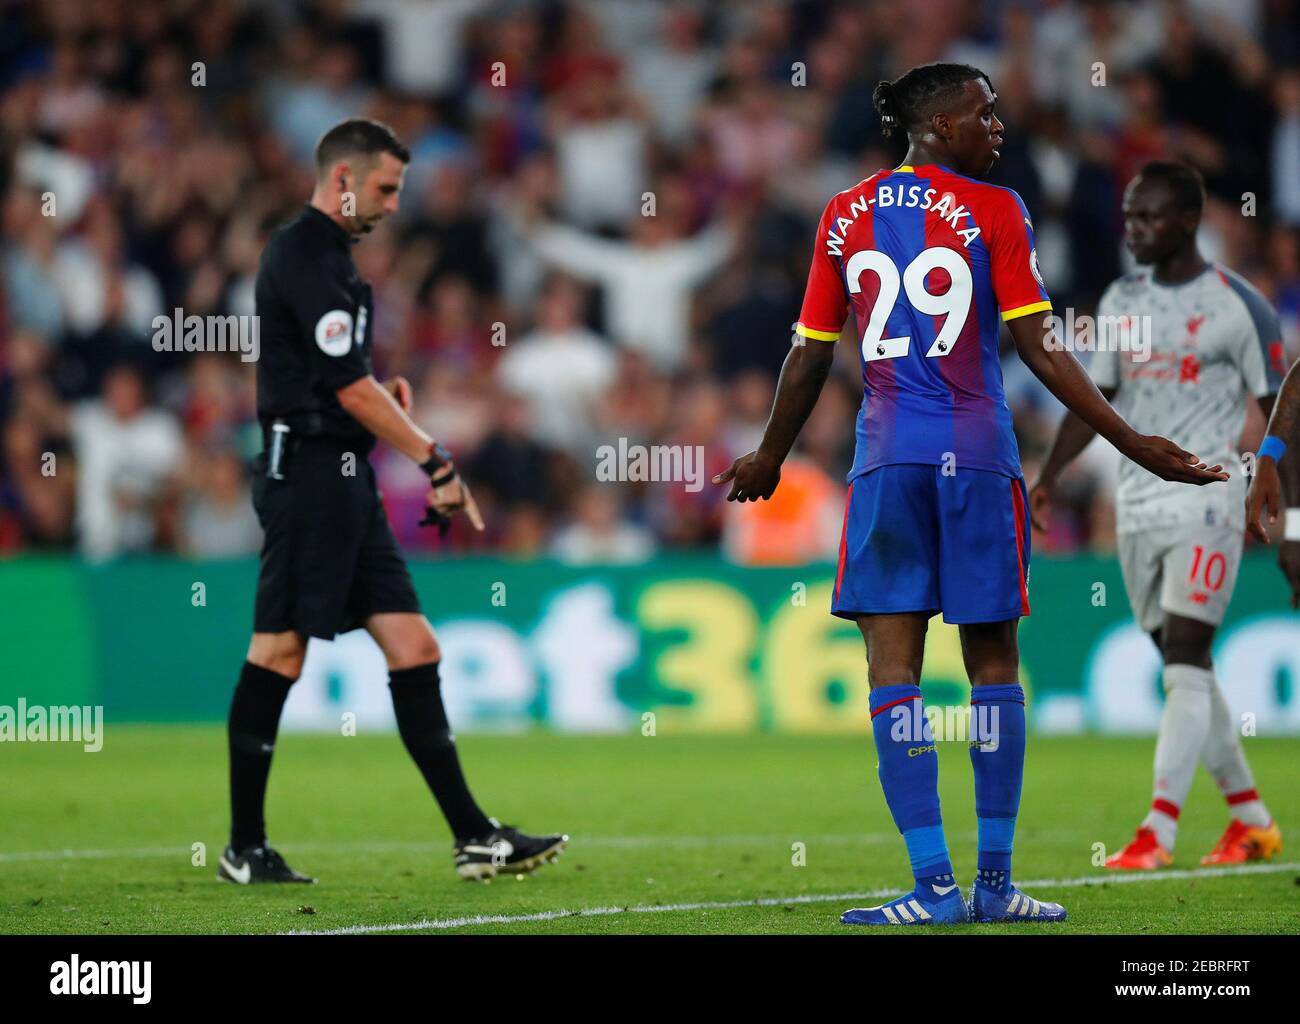 Soccer Football - Premier League - Crystal Palace v Liverpool - Selhurst Park, London, Britain - August 20, 2018  Crystal Palace's Aaron Wan-Bissaka concedes a foul against Liverpool's Mohamed Salah (not pictured) and is subsequently shown a red card by the referee                      REUTERS/Eddie Keogh  EDITORIAL USE ONLY. No use with unauthorized audio, video, data, fixture lists, club/league logos or 'live' services. Online in-match use limited to 75 images, no video emulation. No use in betting, games or single club/league/player publications.  Please contact your account representative  Stock Photo